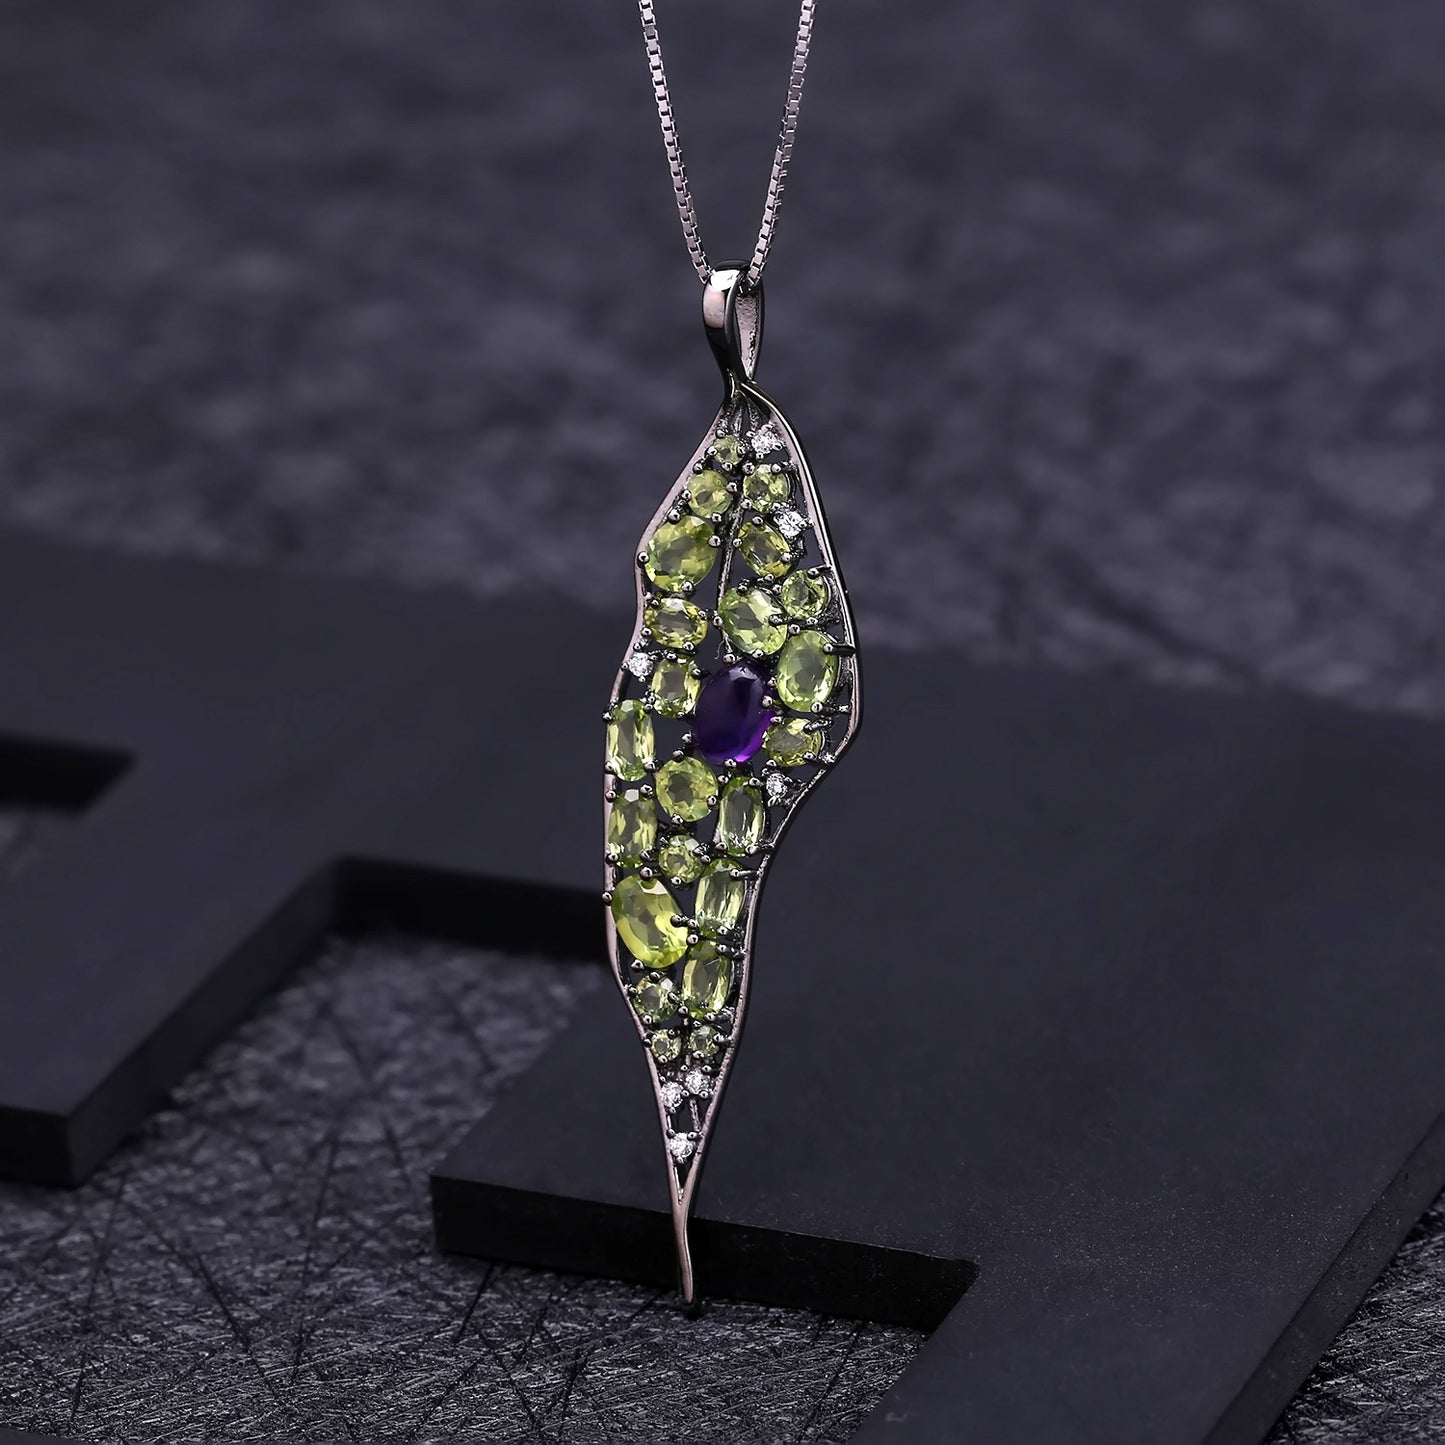 Italian Craft Design Natural Style Jewelry Colourful Gemstone Leaf Pendant Silver Necklace for Women